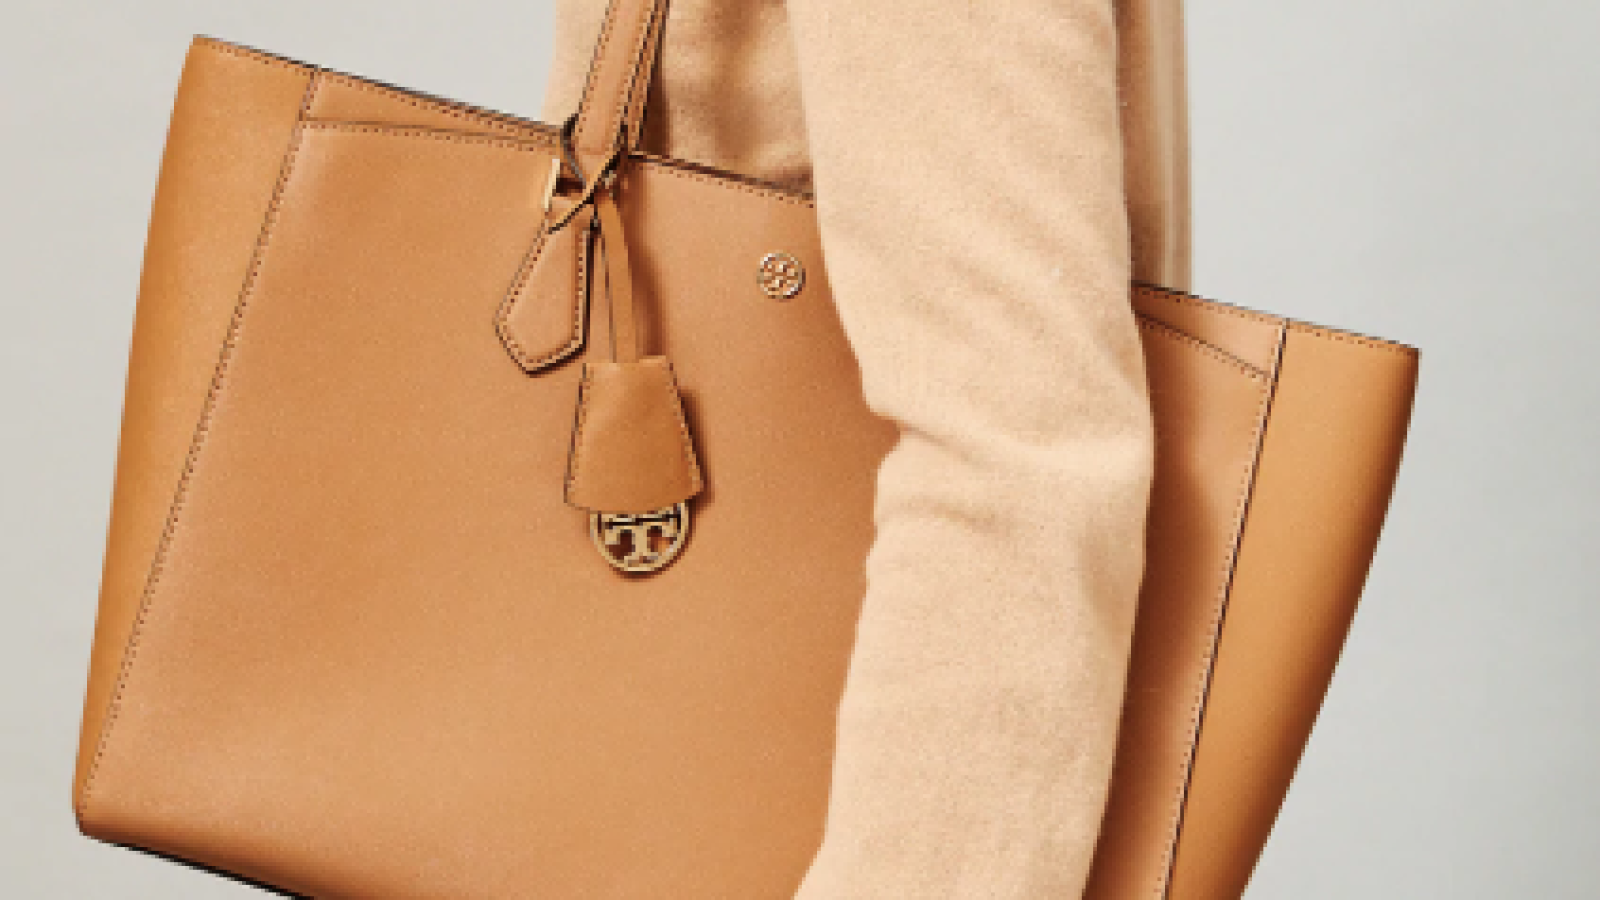 Tory Burch, Bags, Tory Burch Saffiano Leather Tote Bag